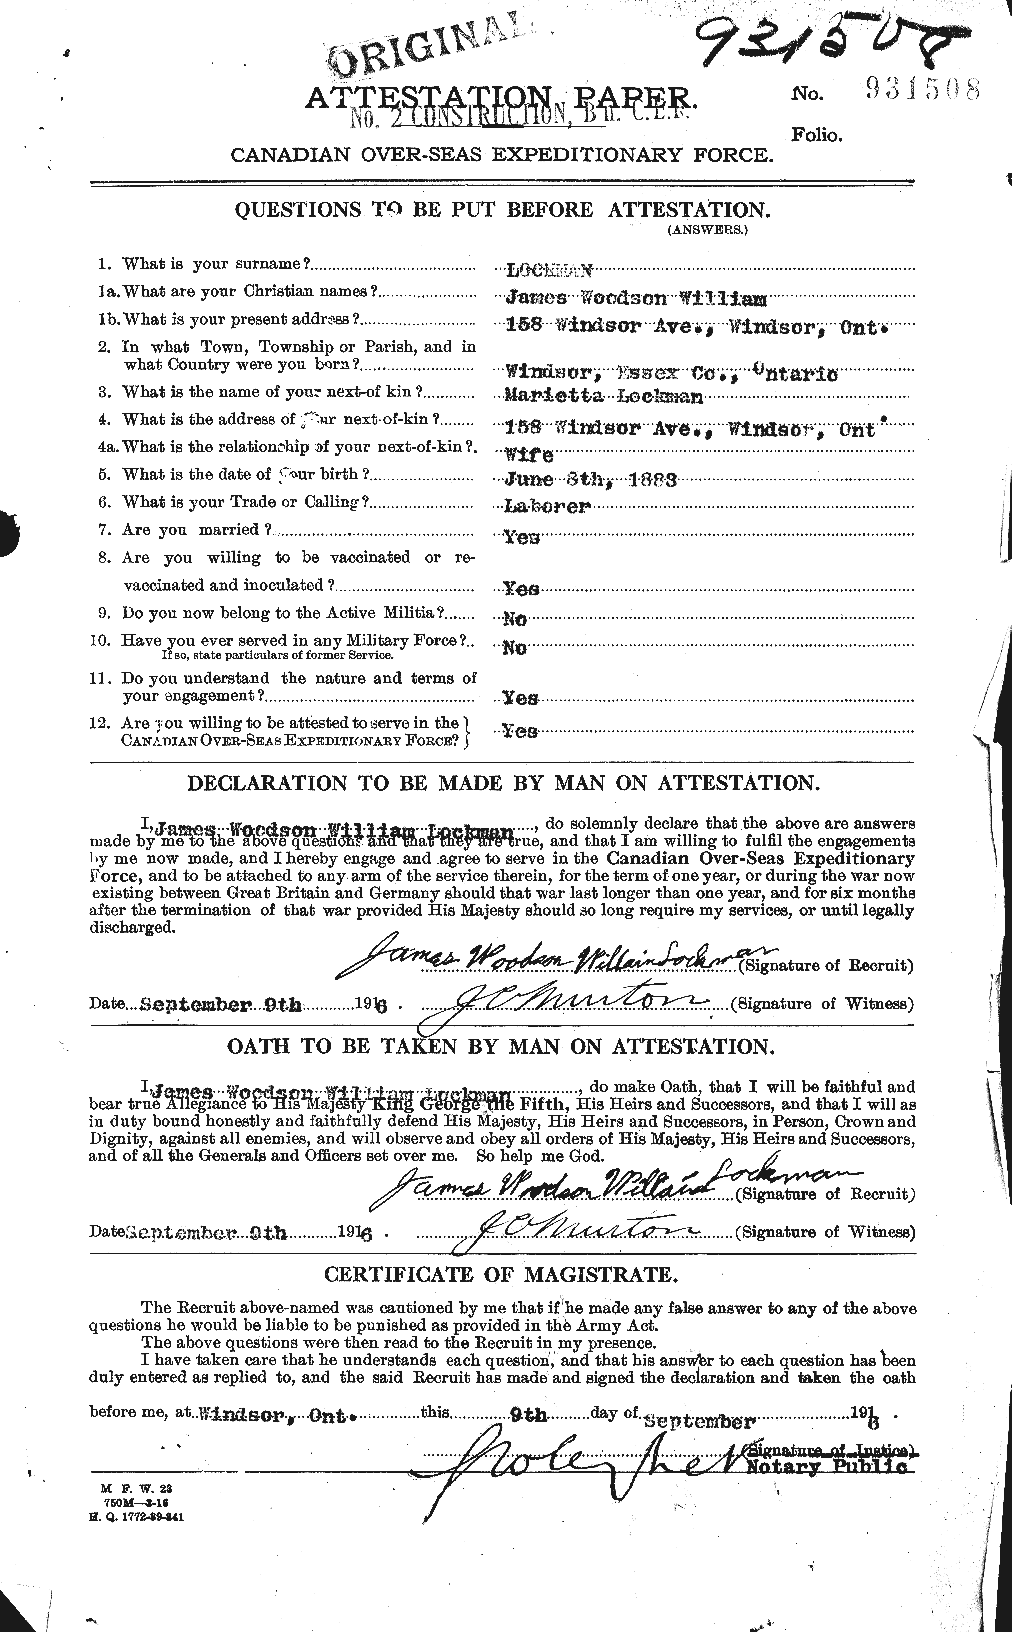 Personnel Records of the First World War - CEF 464650a